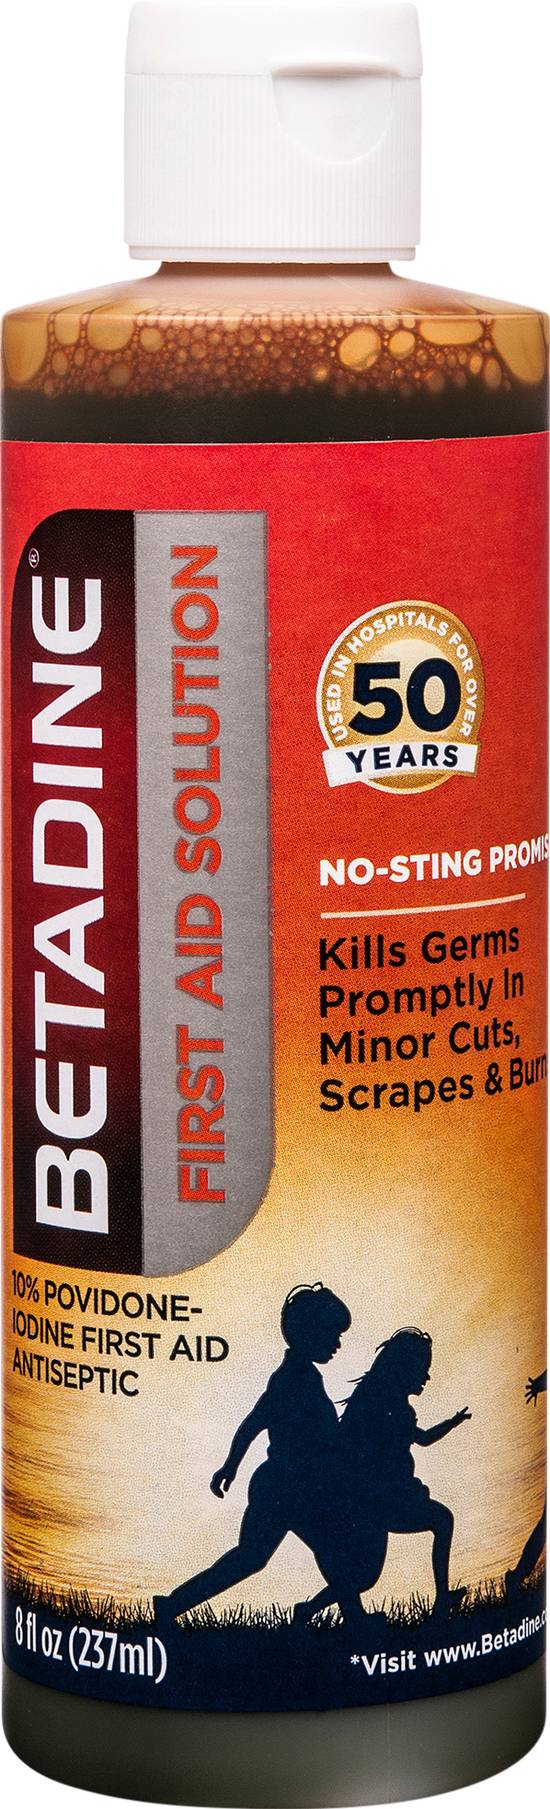 Betadine Antiseptic First Aid Solution